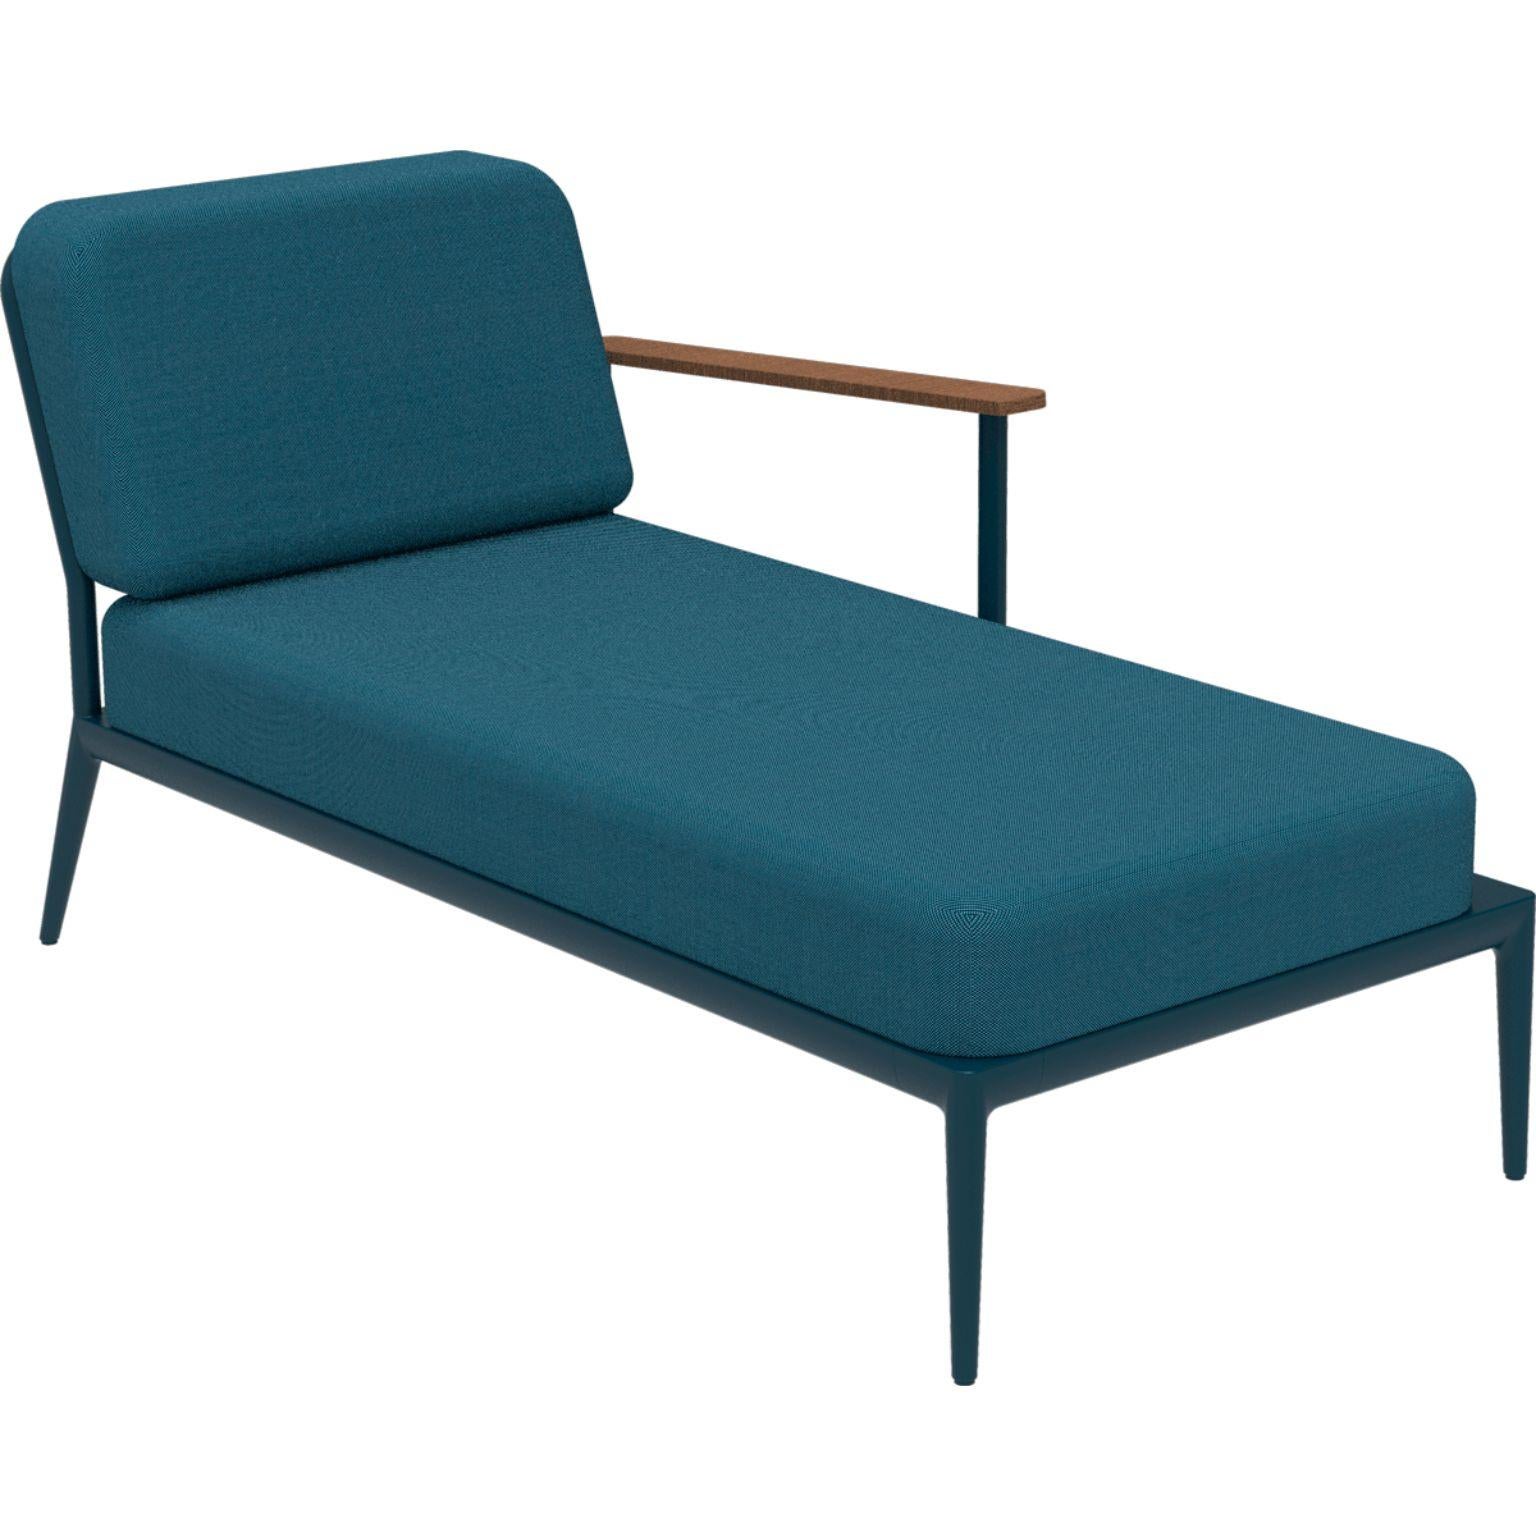 Nature Navy Left Chaise Longue by MOWEE
Dimensions: D155 x W76 x H81 cm (seat height 42 cm).
Material: Aluminum, upholstery and Iroko Wood.
Weight: 28 kg.
Also available in different colors and finishes. Please contact us.

An unmistakable